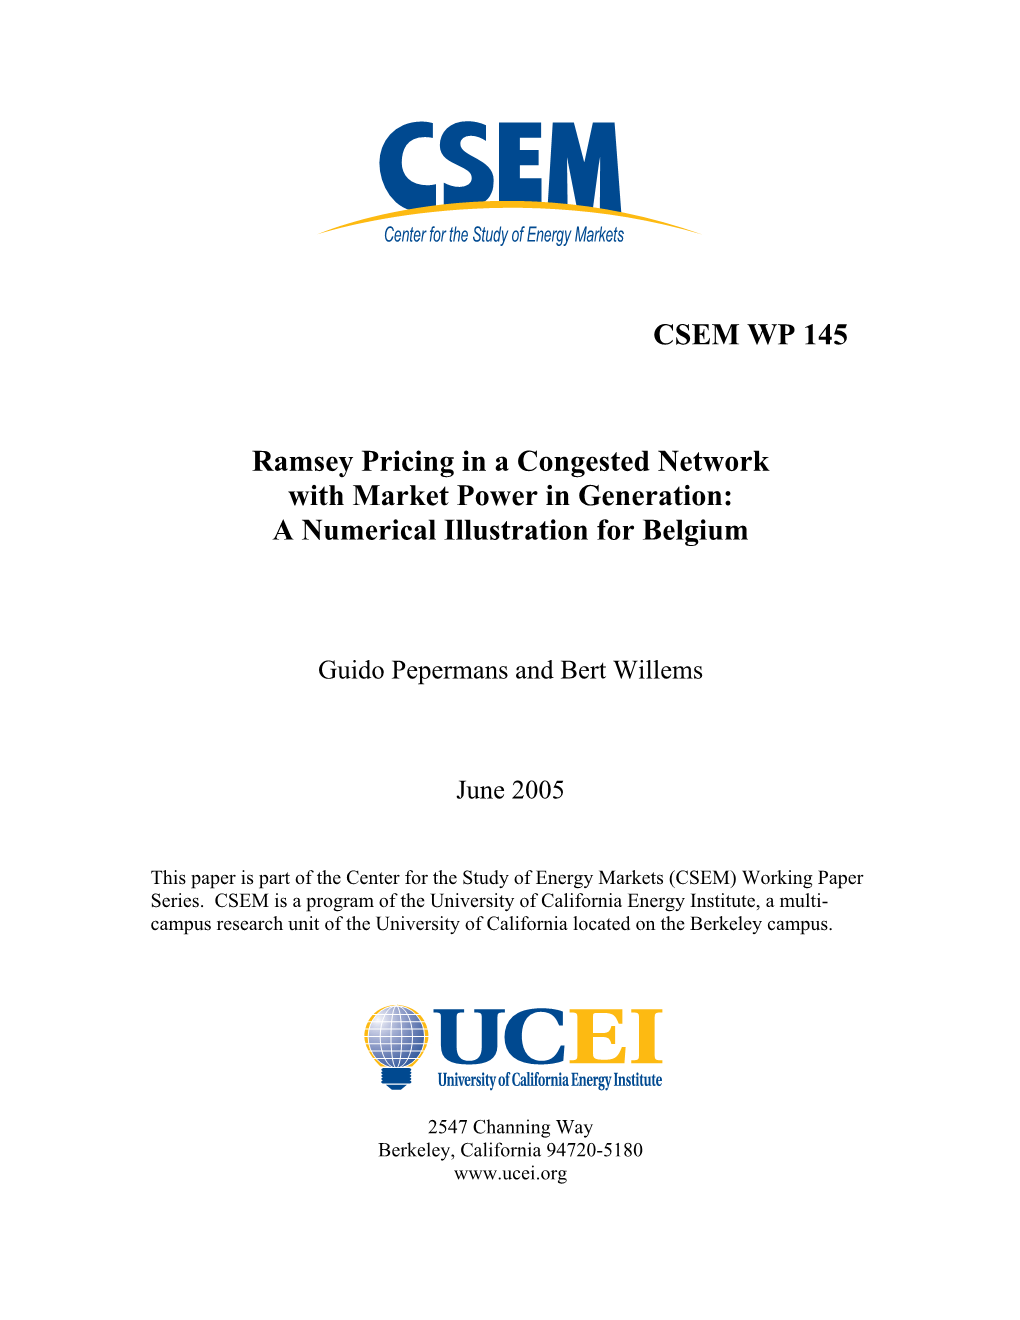 CSEM WP 145 Ramsey Pricing in a Congested Network with Market Power in Generation